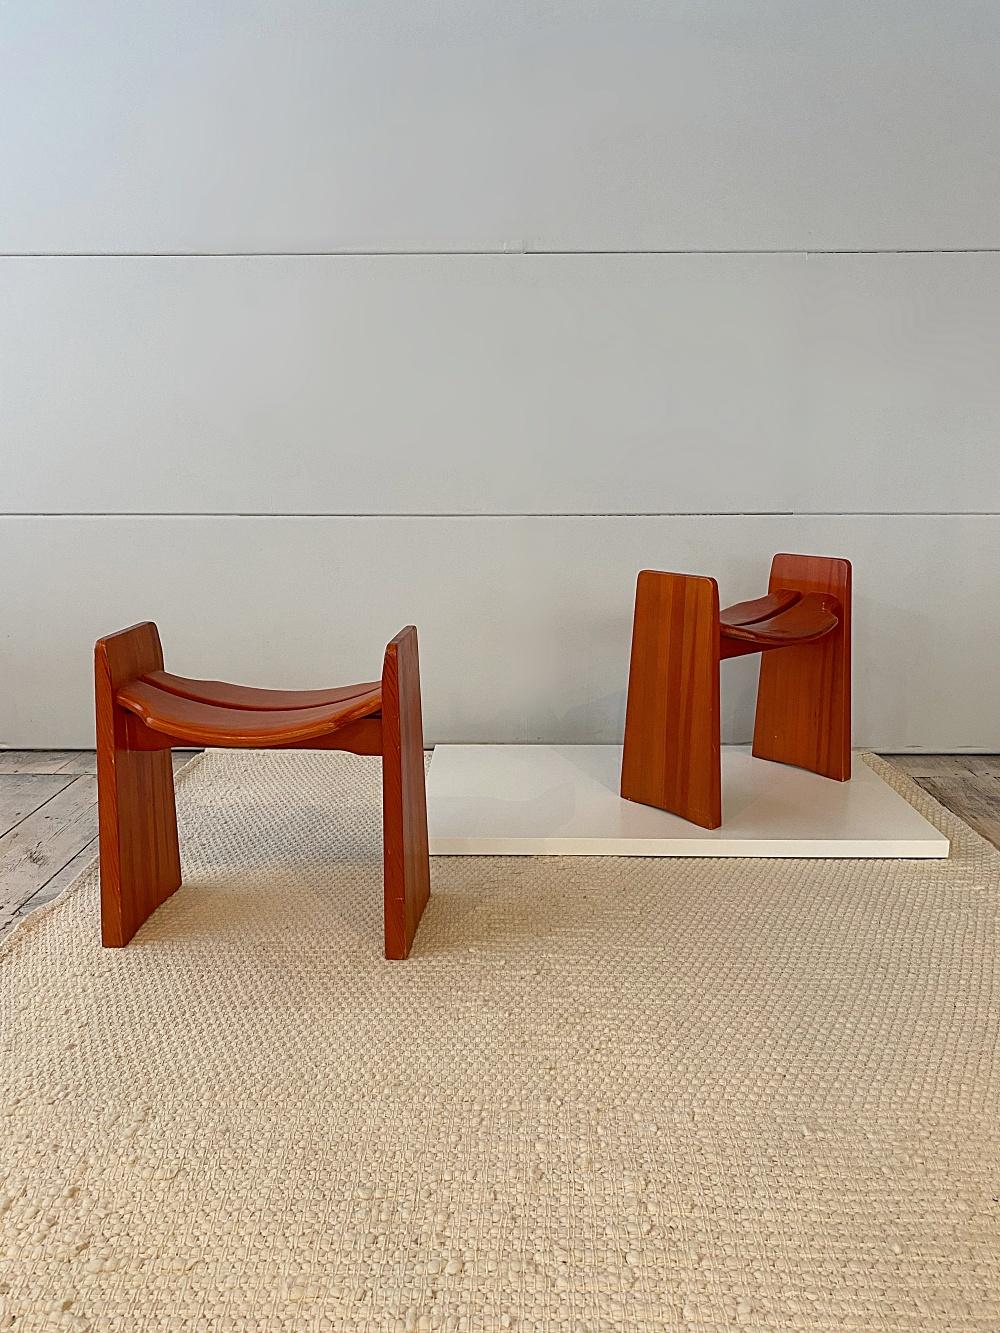 Pair ob beautiful sculptural 'Jonte' stools designed in 1969 by Gilbert Marklund and manufactured by Furusnickarn AB in Sweden.
Original condition with nice patina.
   